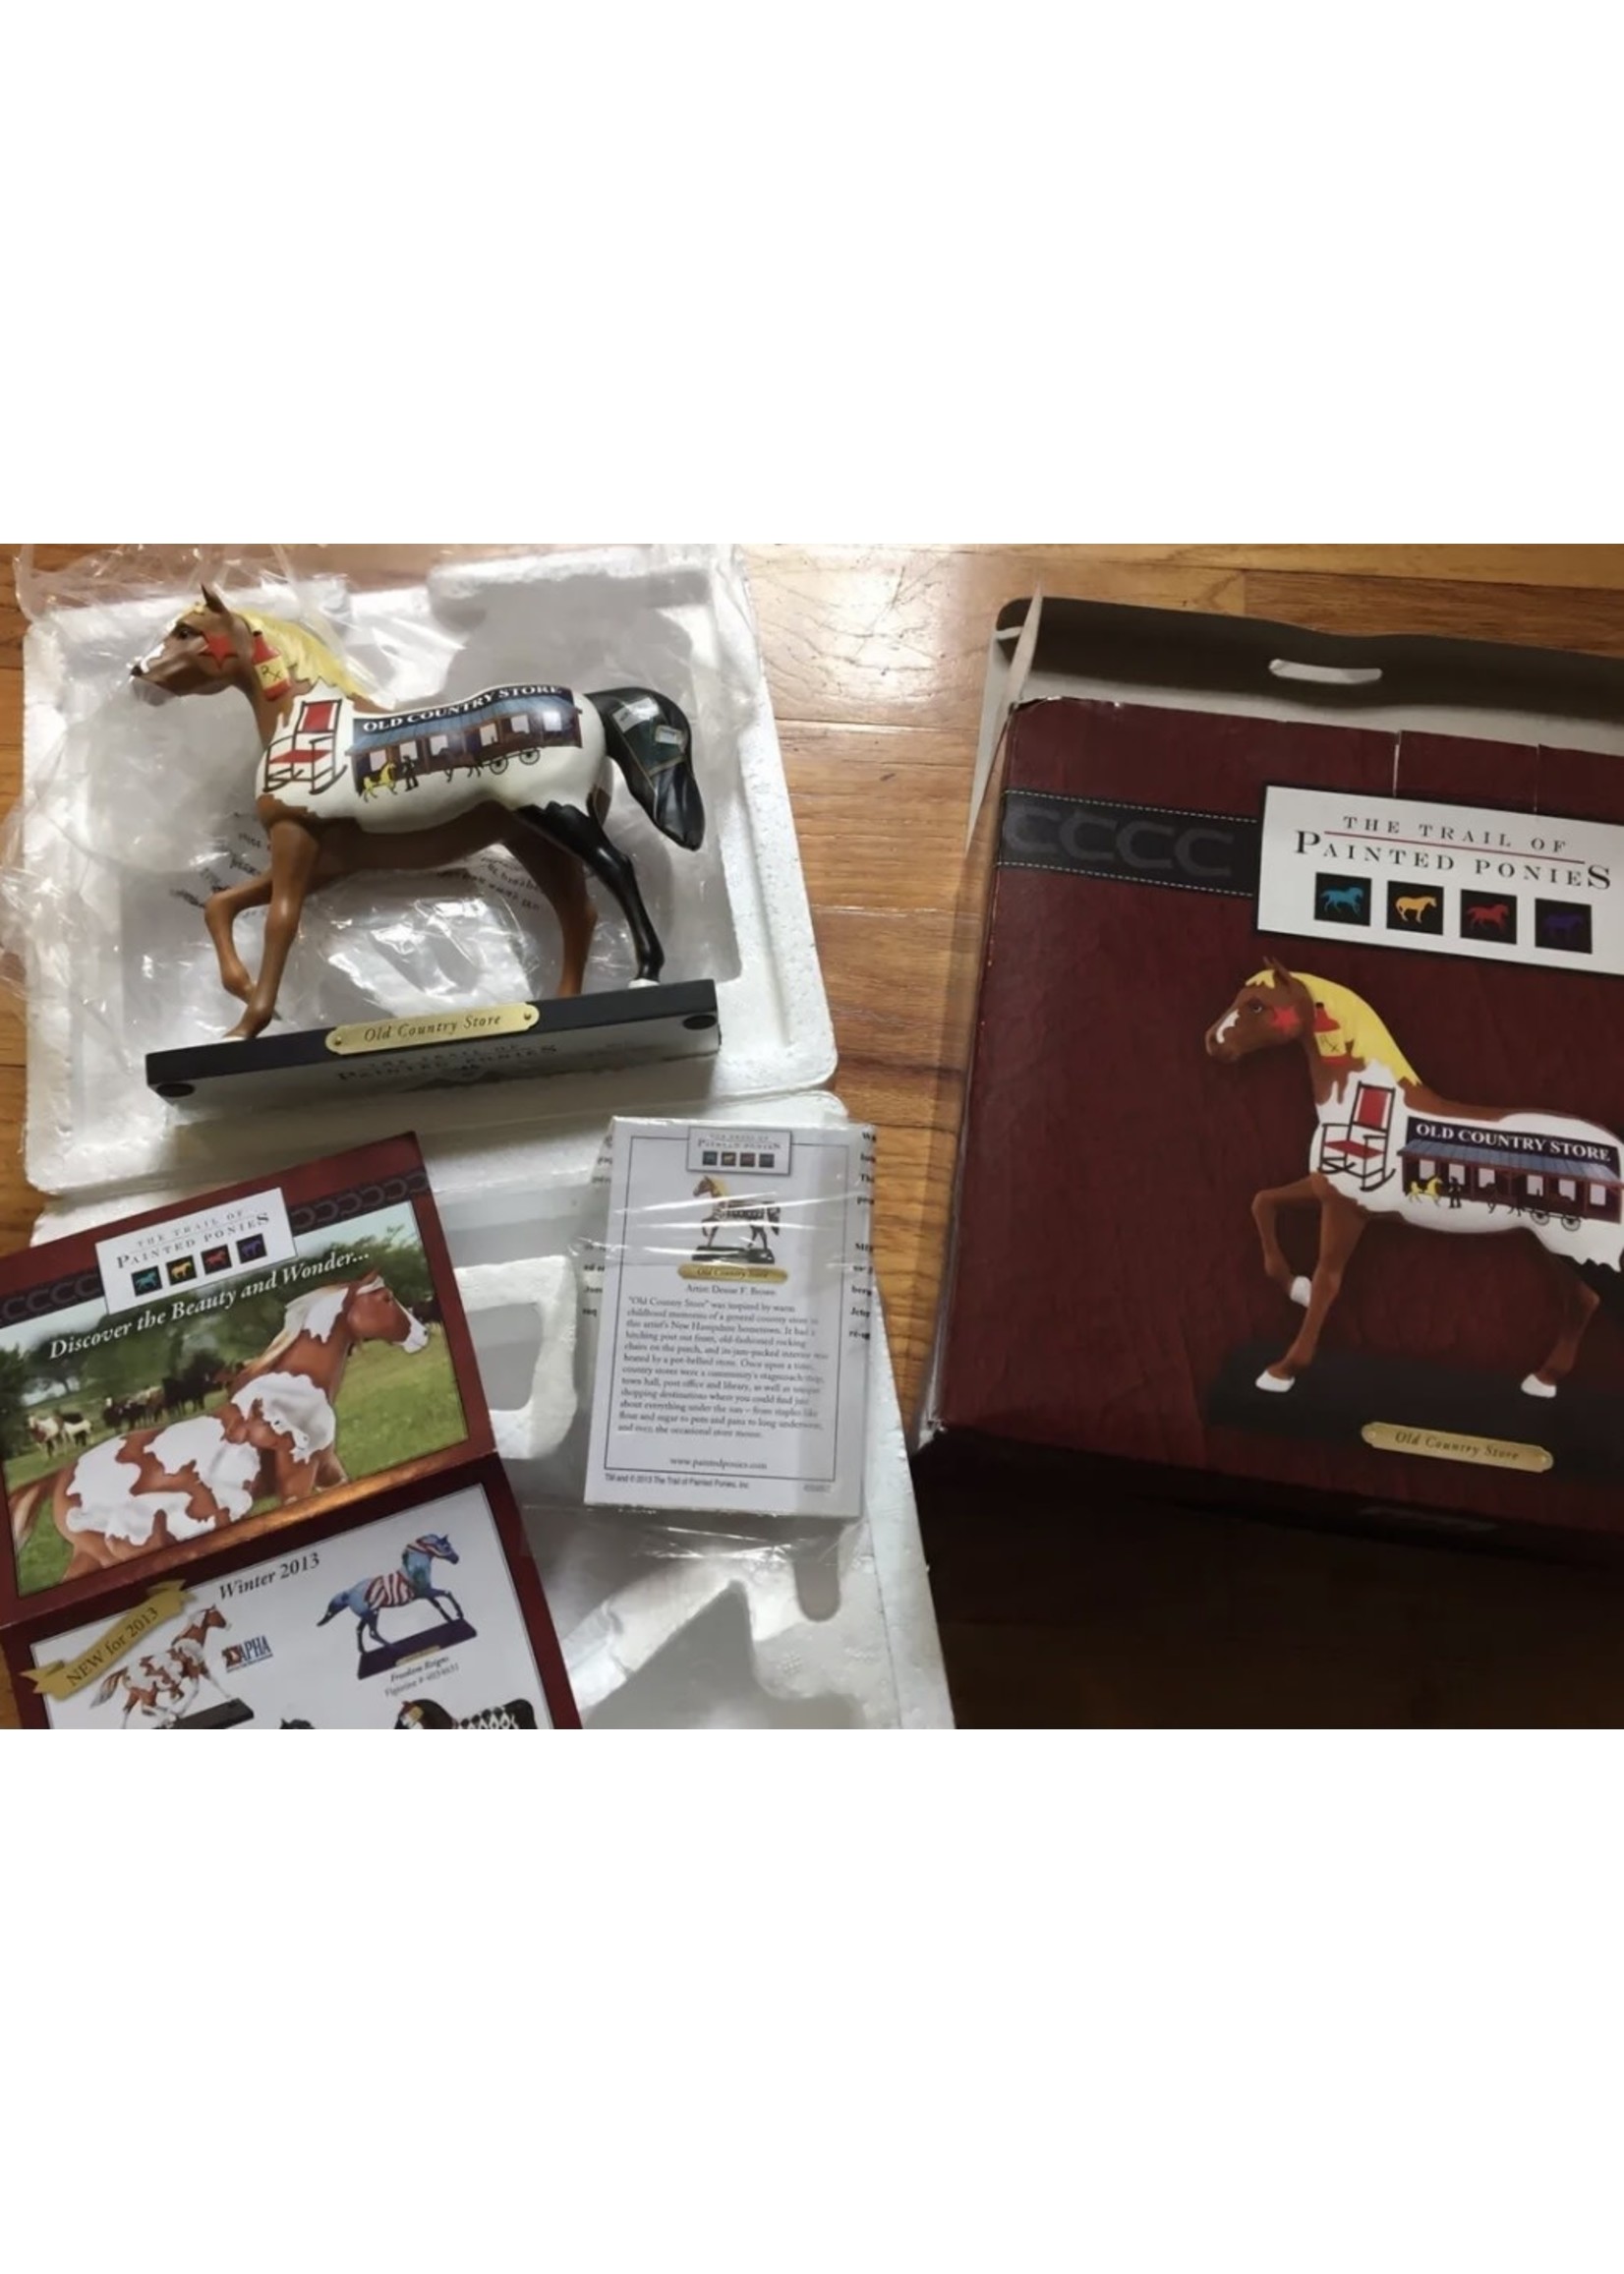 Trail of Painted Ponies TOPP 2013 Old Country Store 4035093LE 1E 346